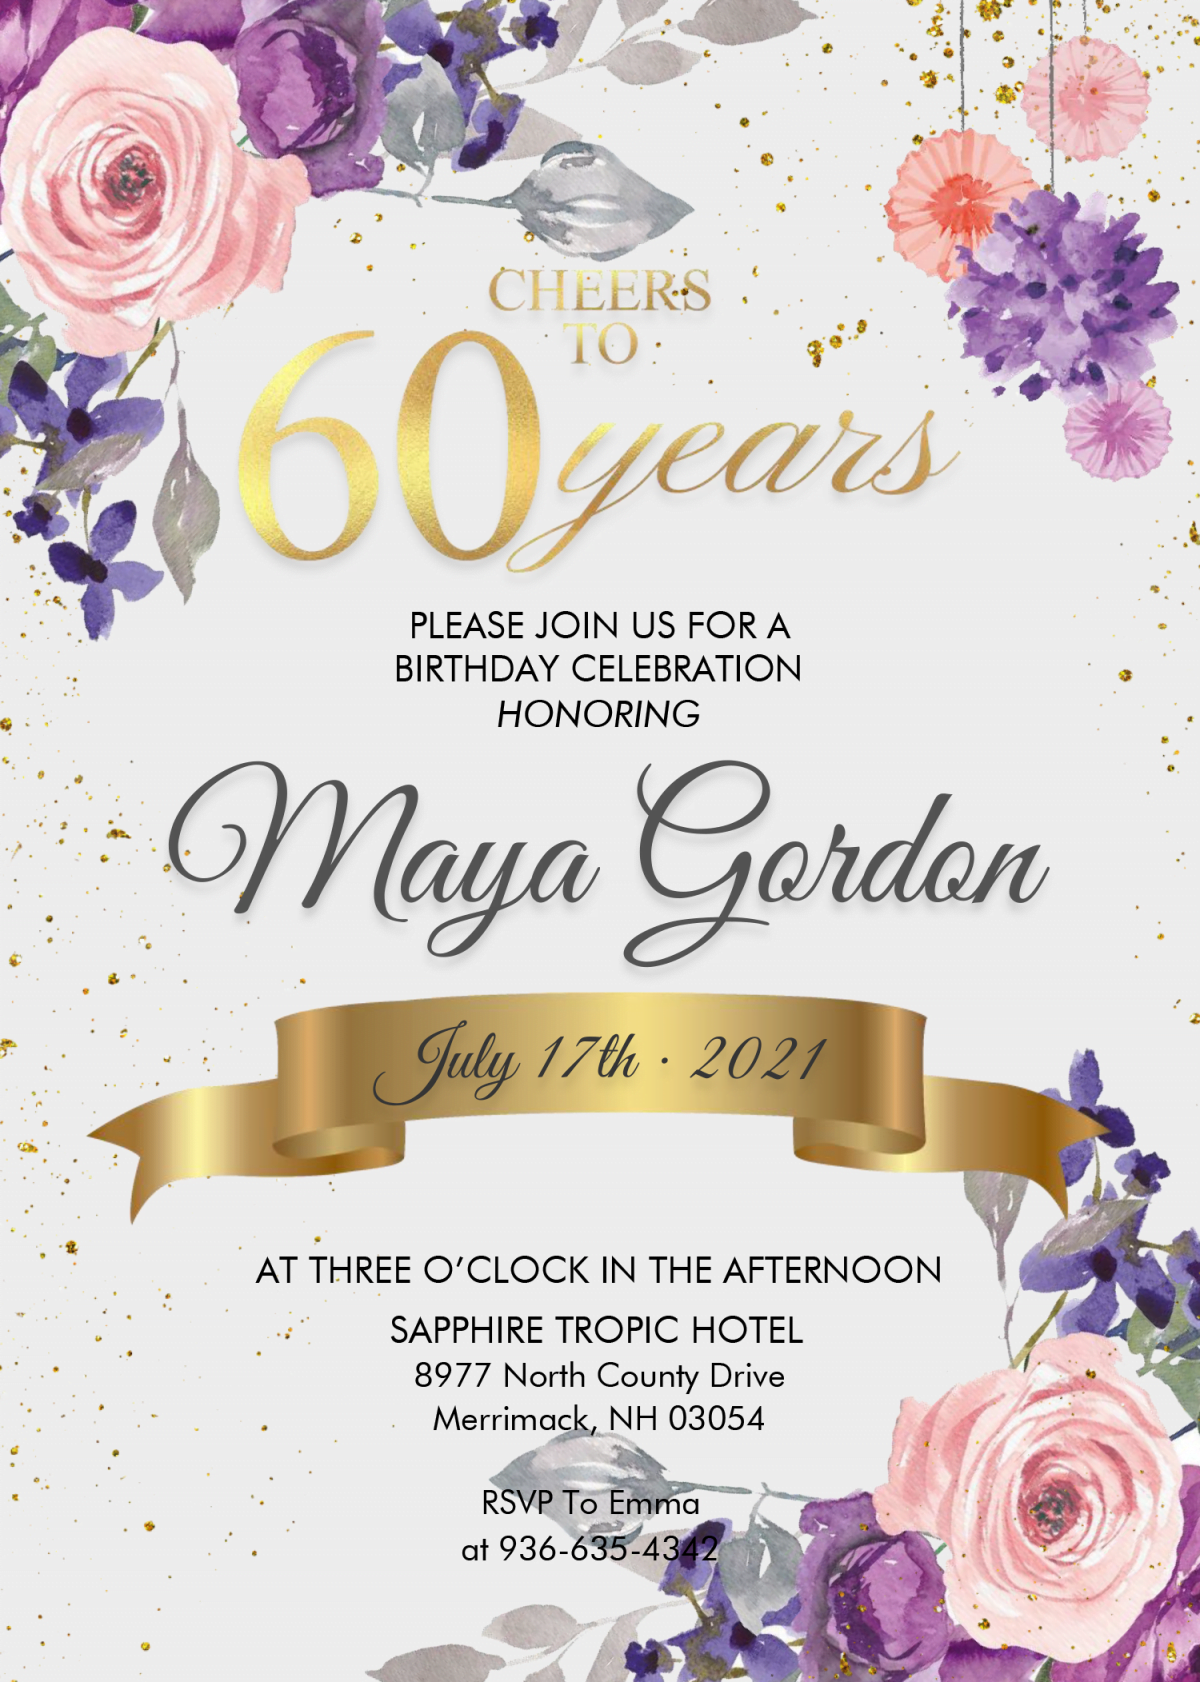 Floral 60th Birthday Invitation Templates - Editable With MS Word and Has Portrait Orientation and Blue Floral